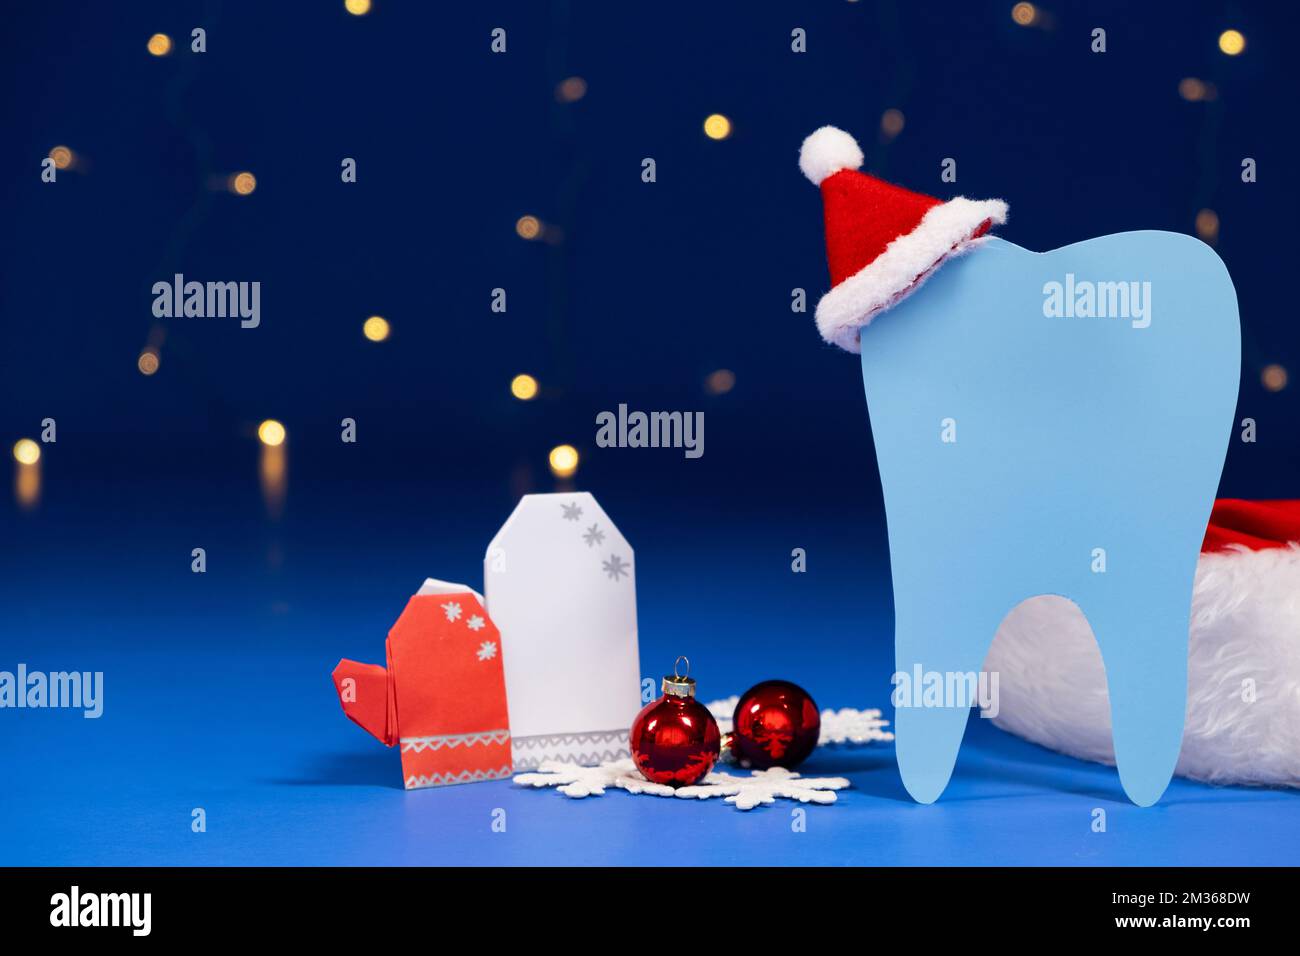 Christmas dentistry - tooth with red santa claus hat, mittens on a blue background. Stock Photo